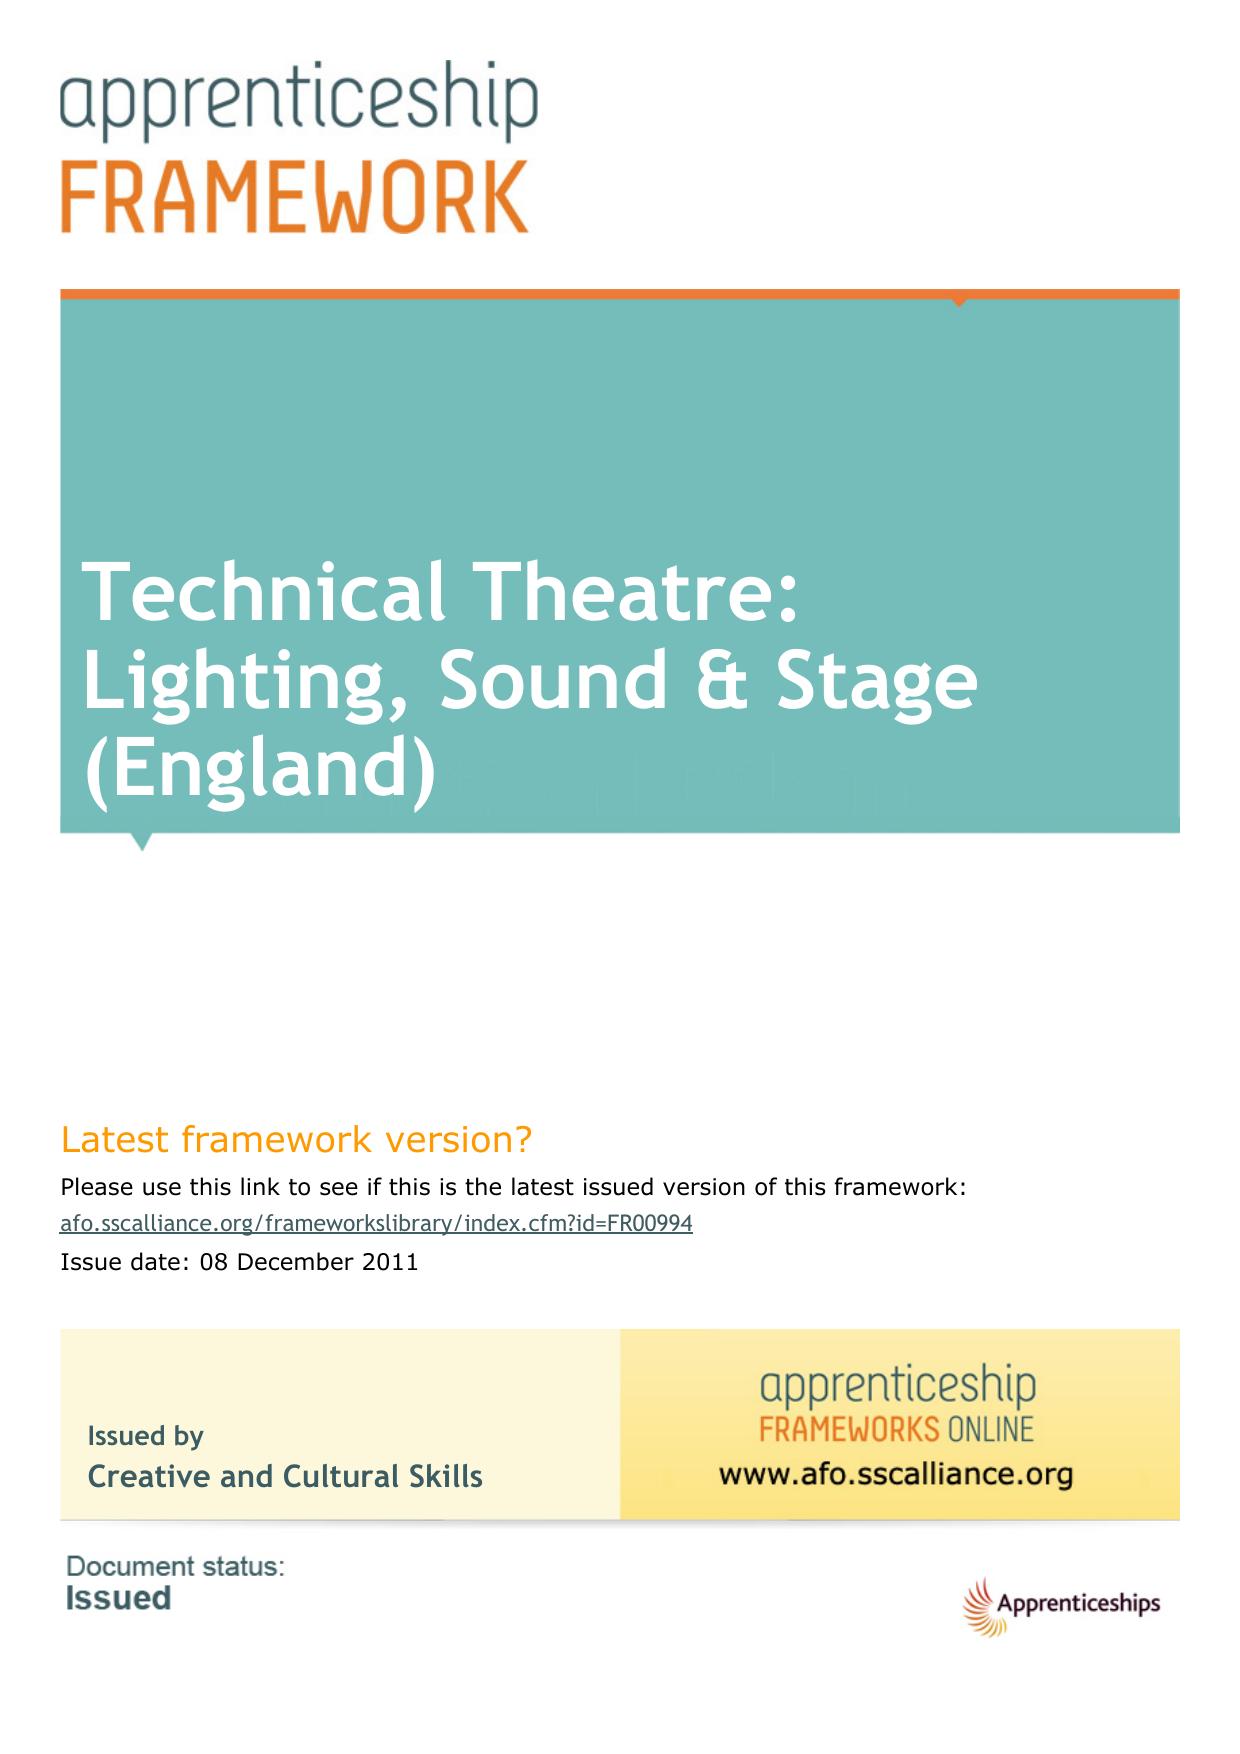 FR00994 - Technical Theatre: Lighting, Sound & Stage